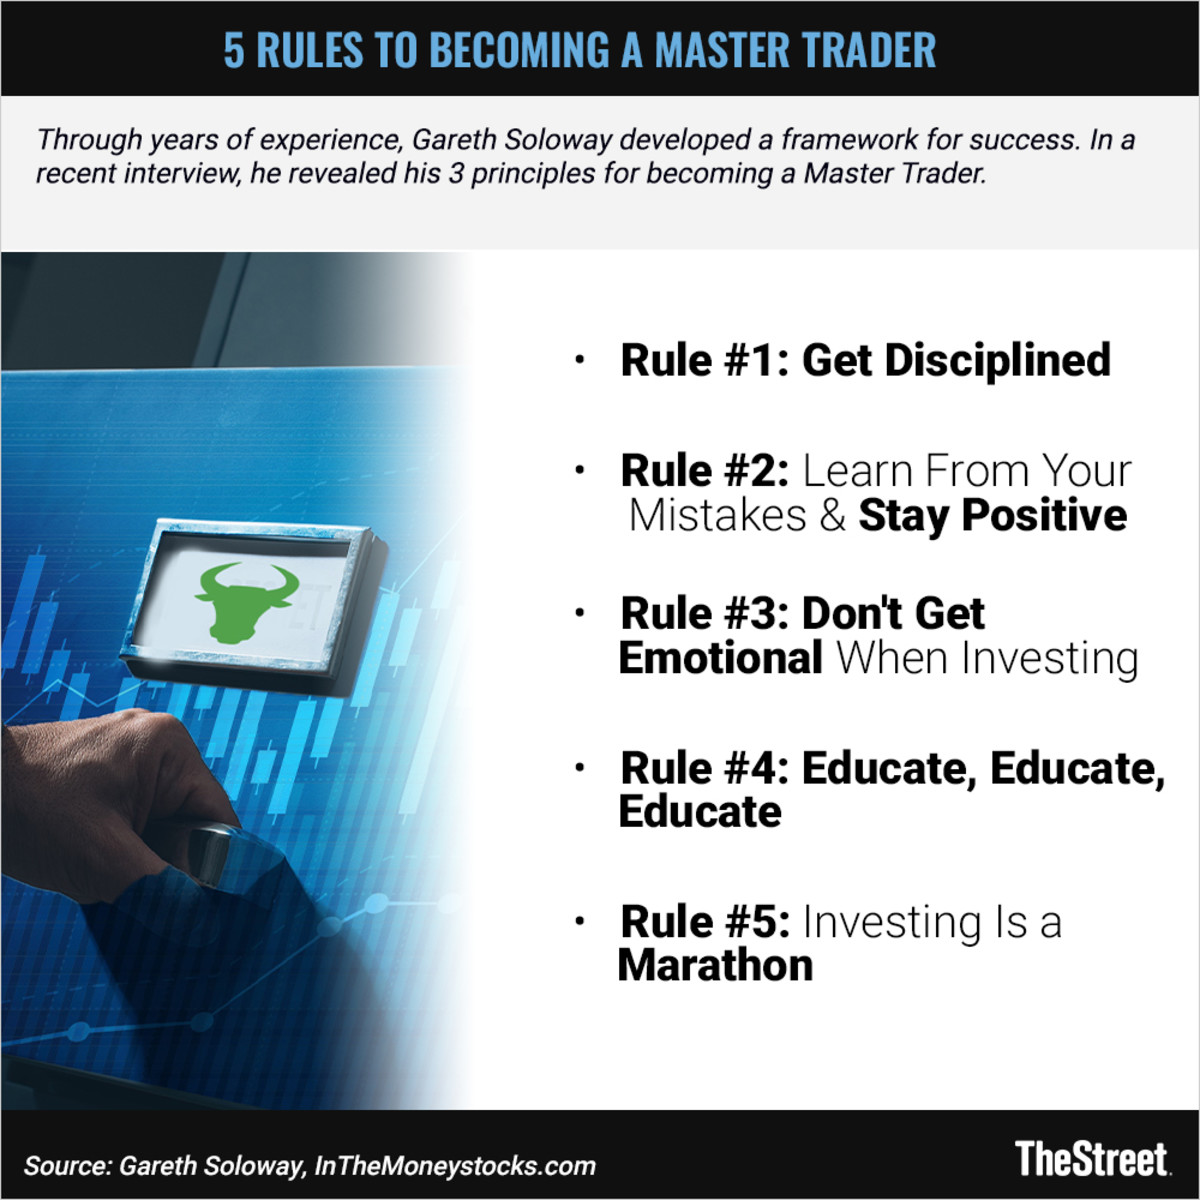 Graphic: 5 Rules to Becoming a Master Trader